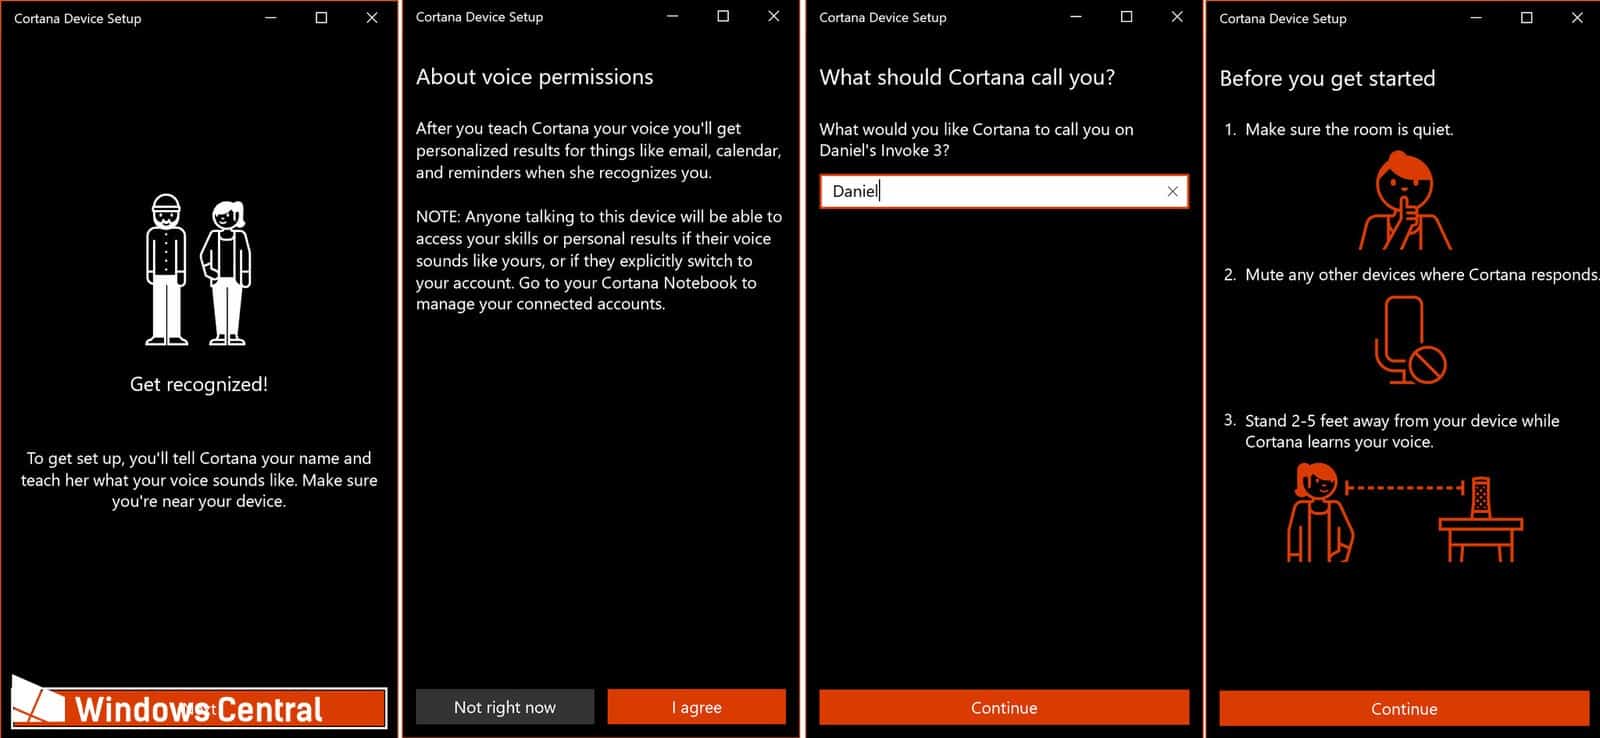 Microsoft's Cortana digital assistant will soon recognize multi user voices - OnMSFT.com - December 11, 2018